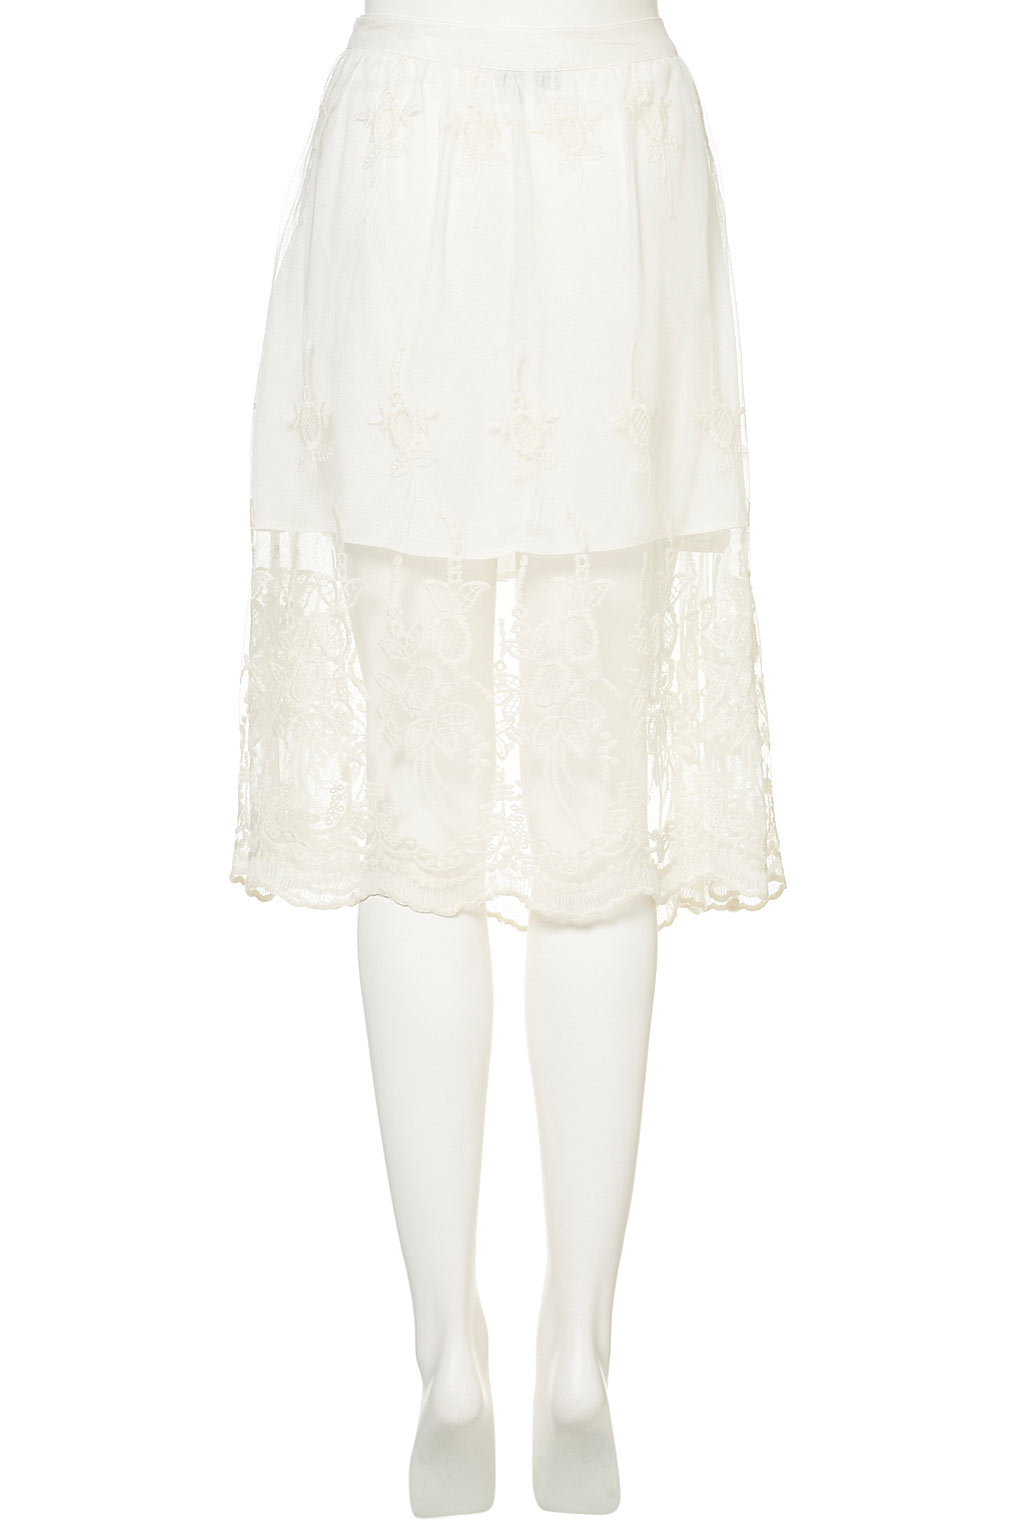 Lyst - Topshop Cream Embroidered Lace Skirt in White